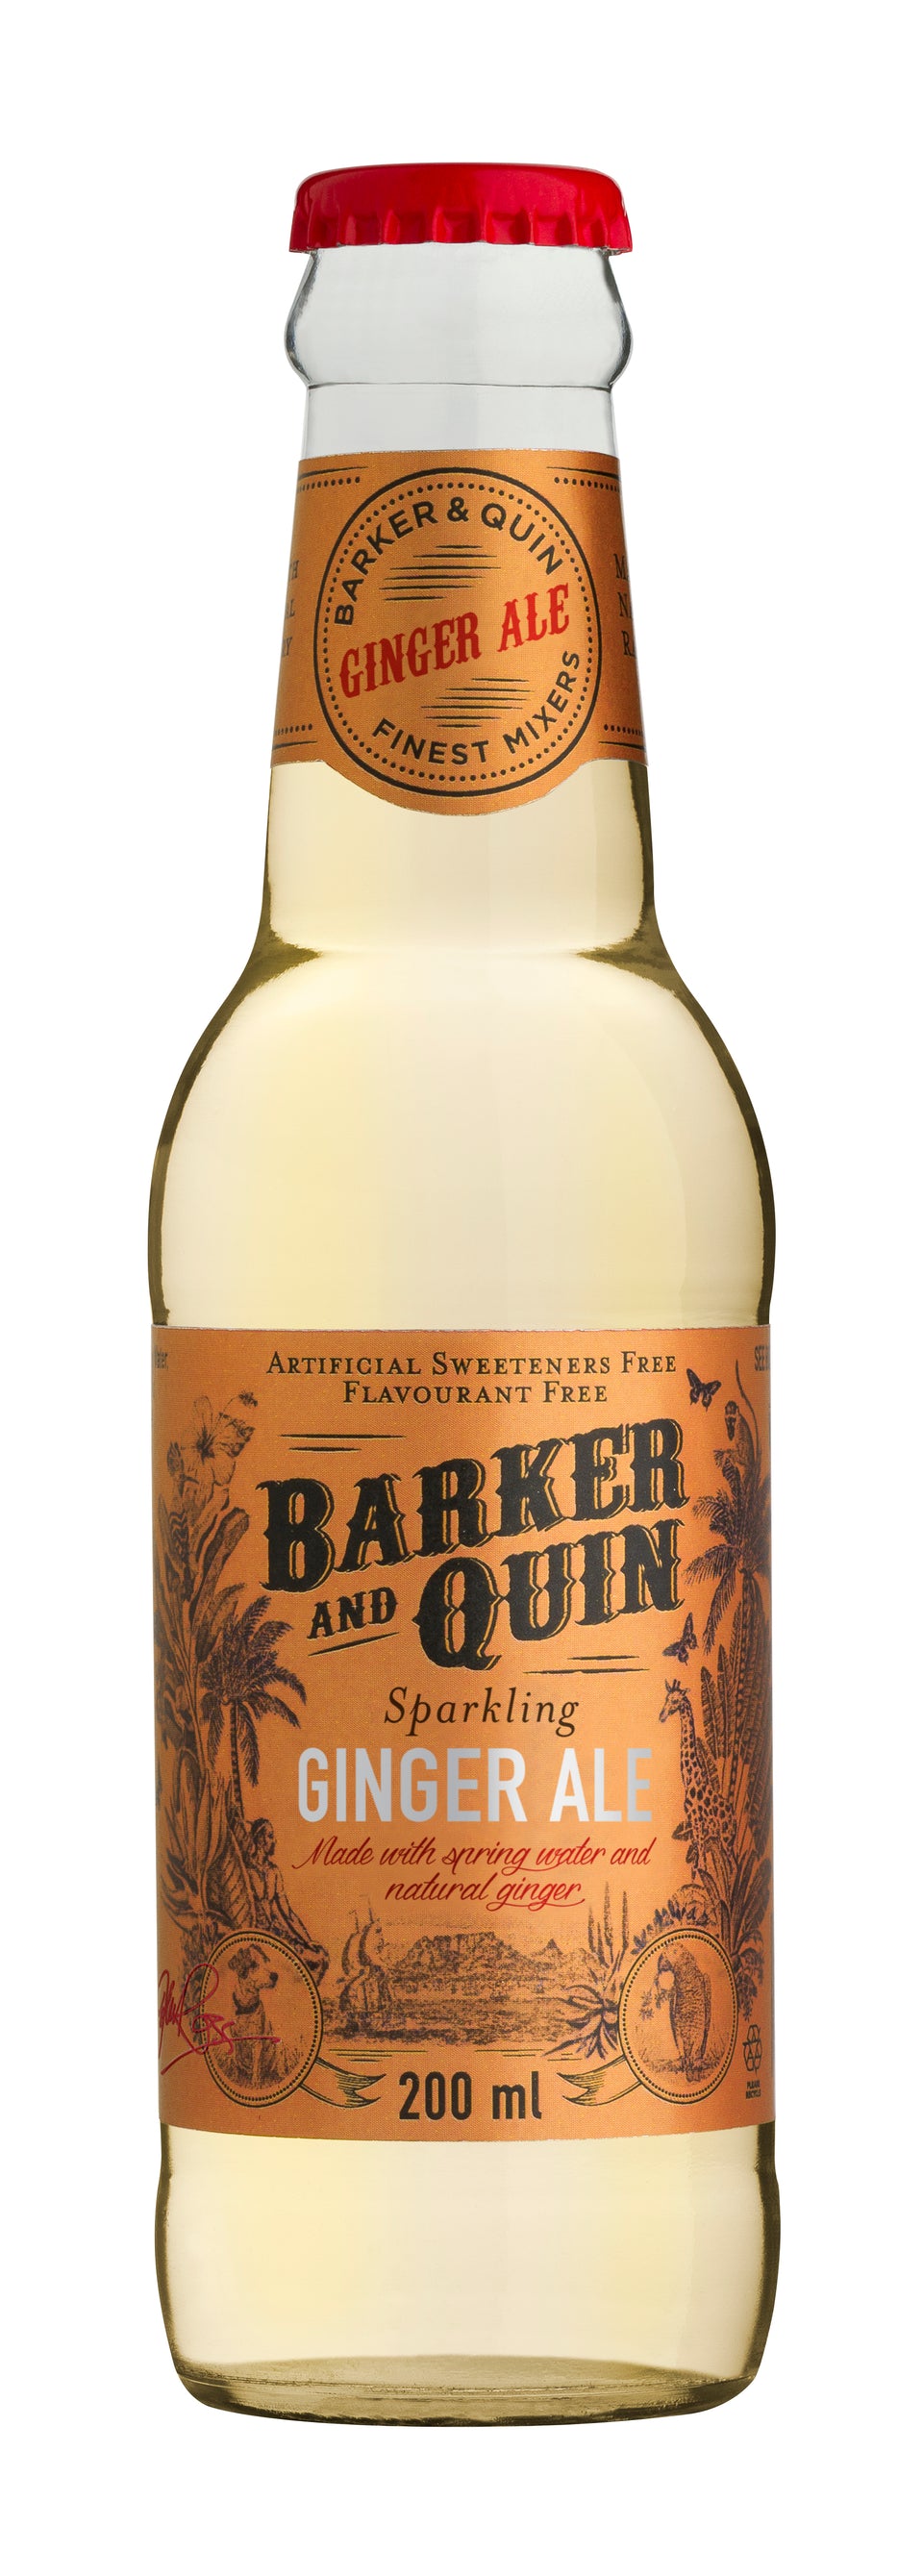 Barker & Quin Sparkling Ginger Ale Mixer Glass 24 x 200ml